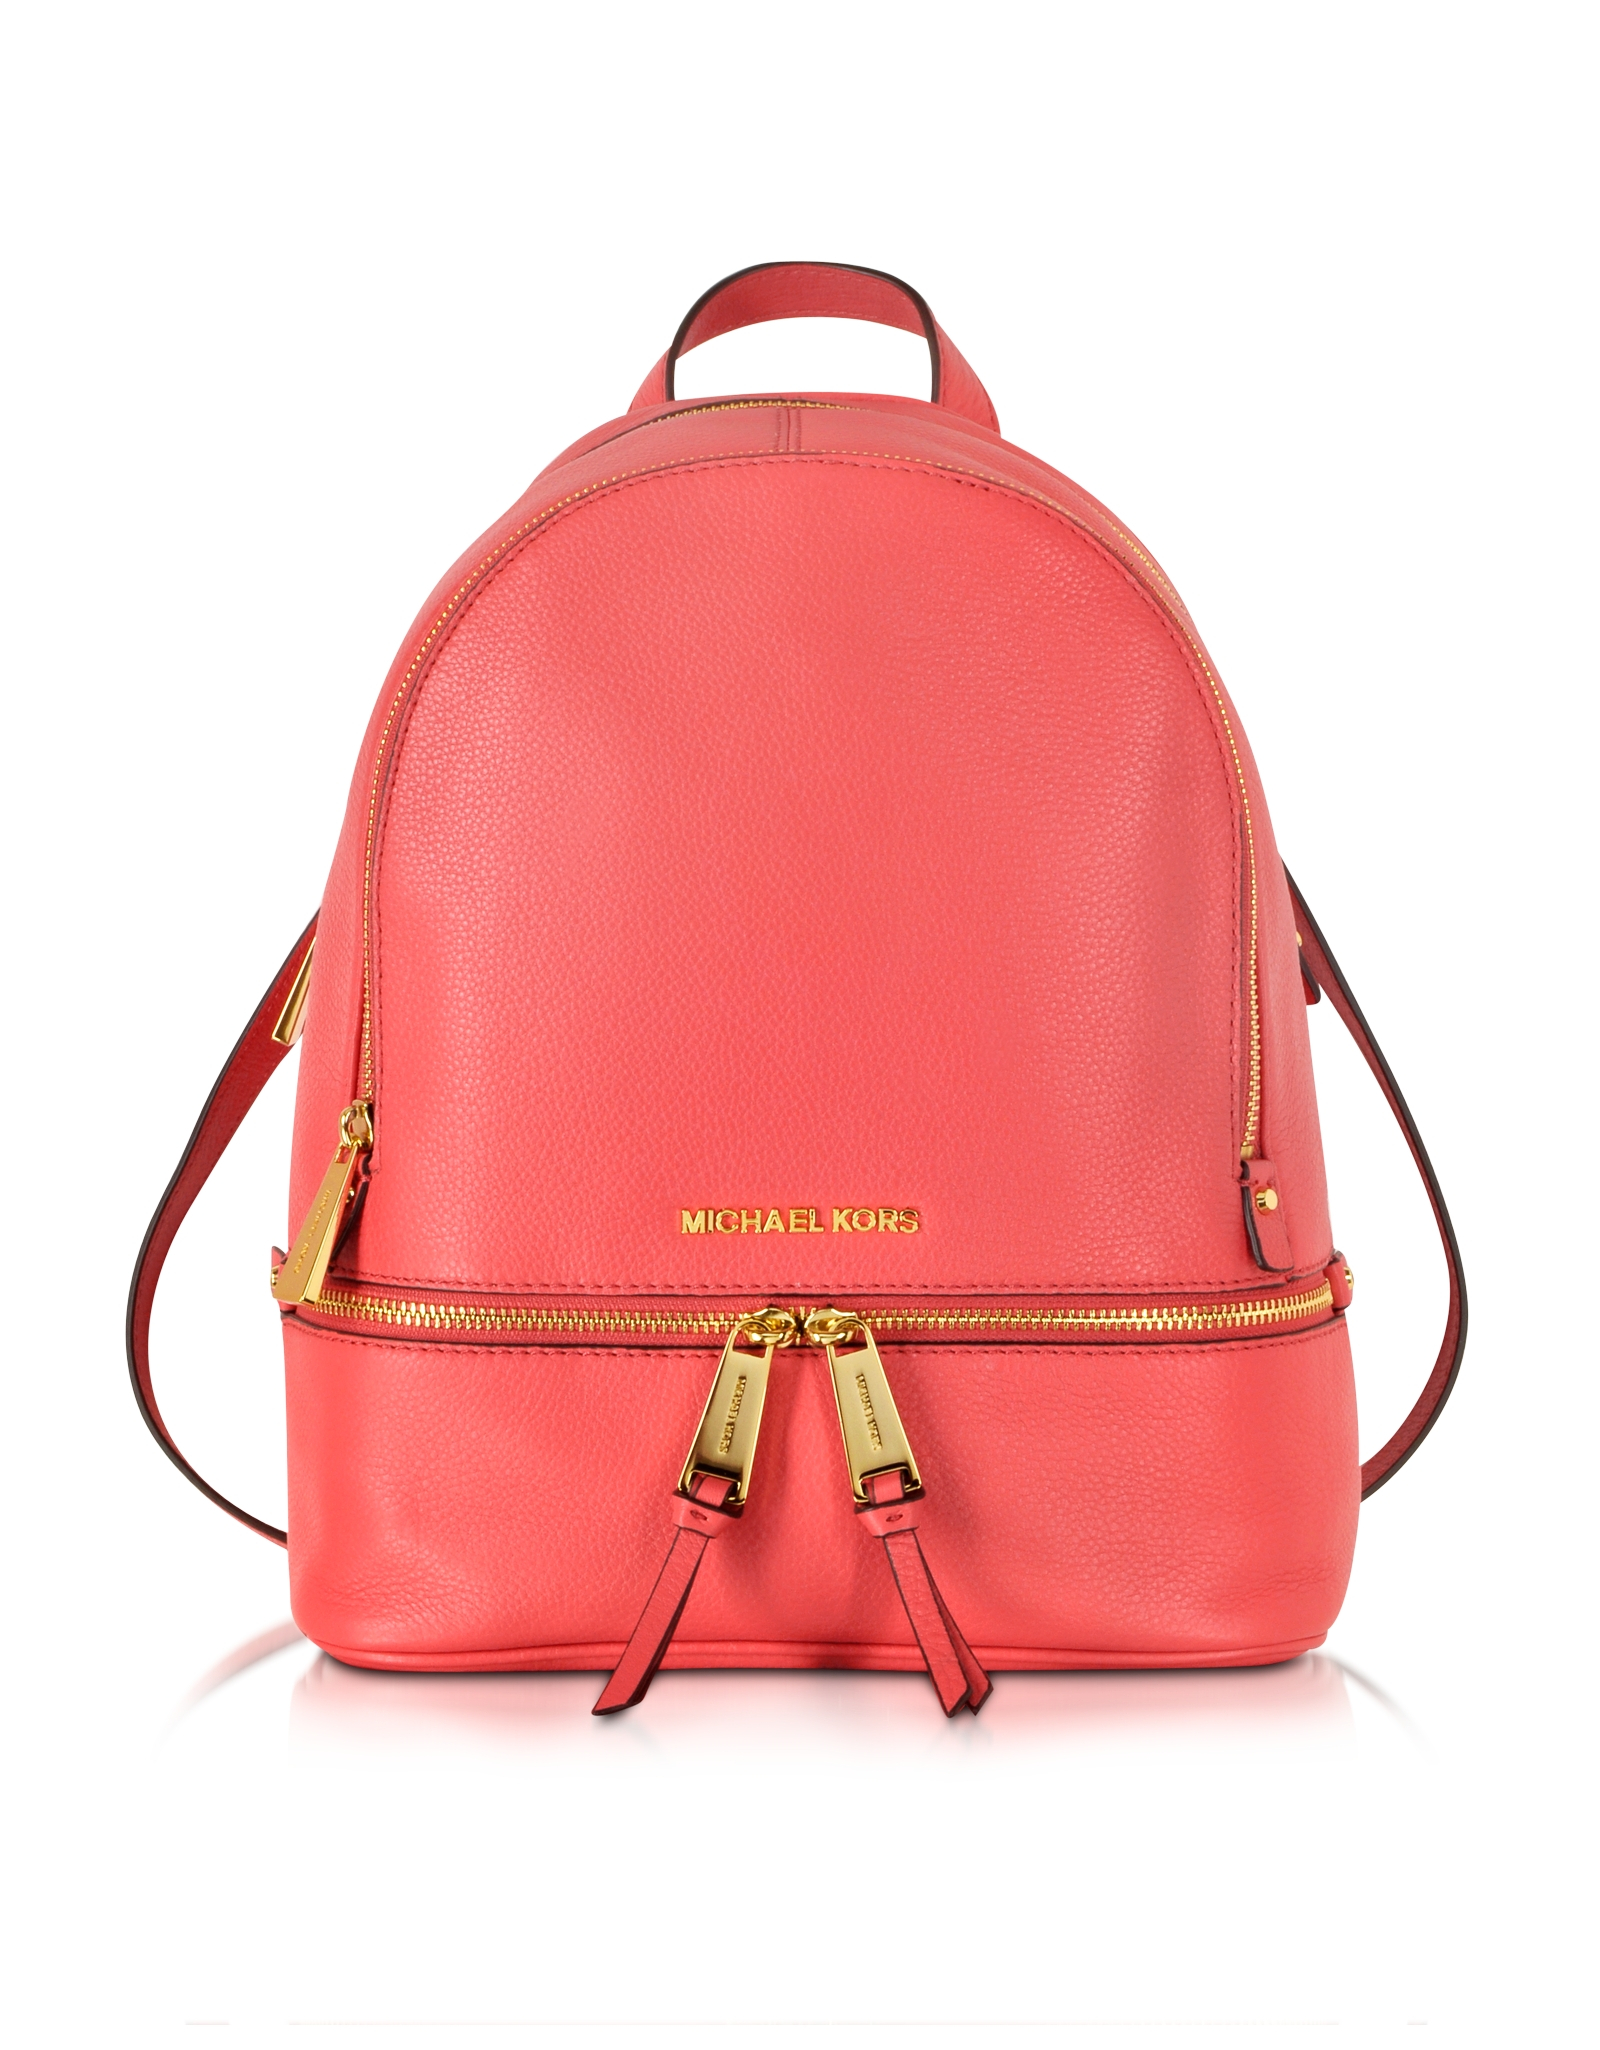 Lyst - Michael Kors Rhea Zip Small Watermelon Leather Backpack in Red